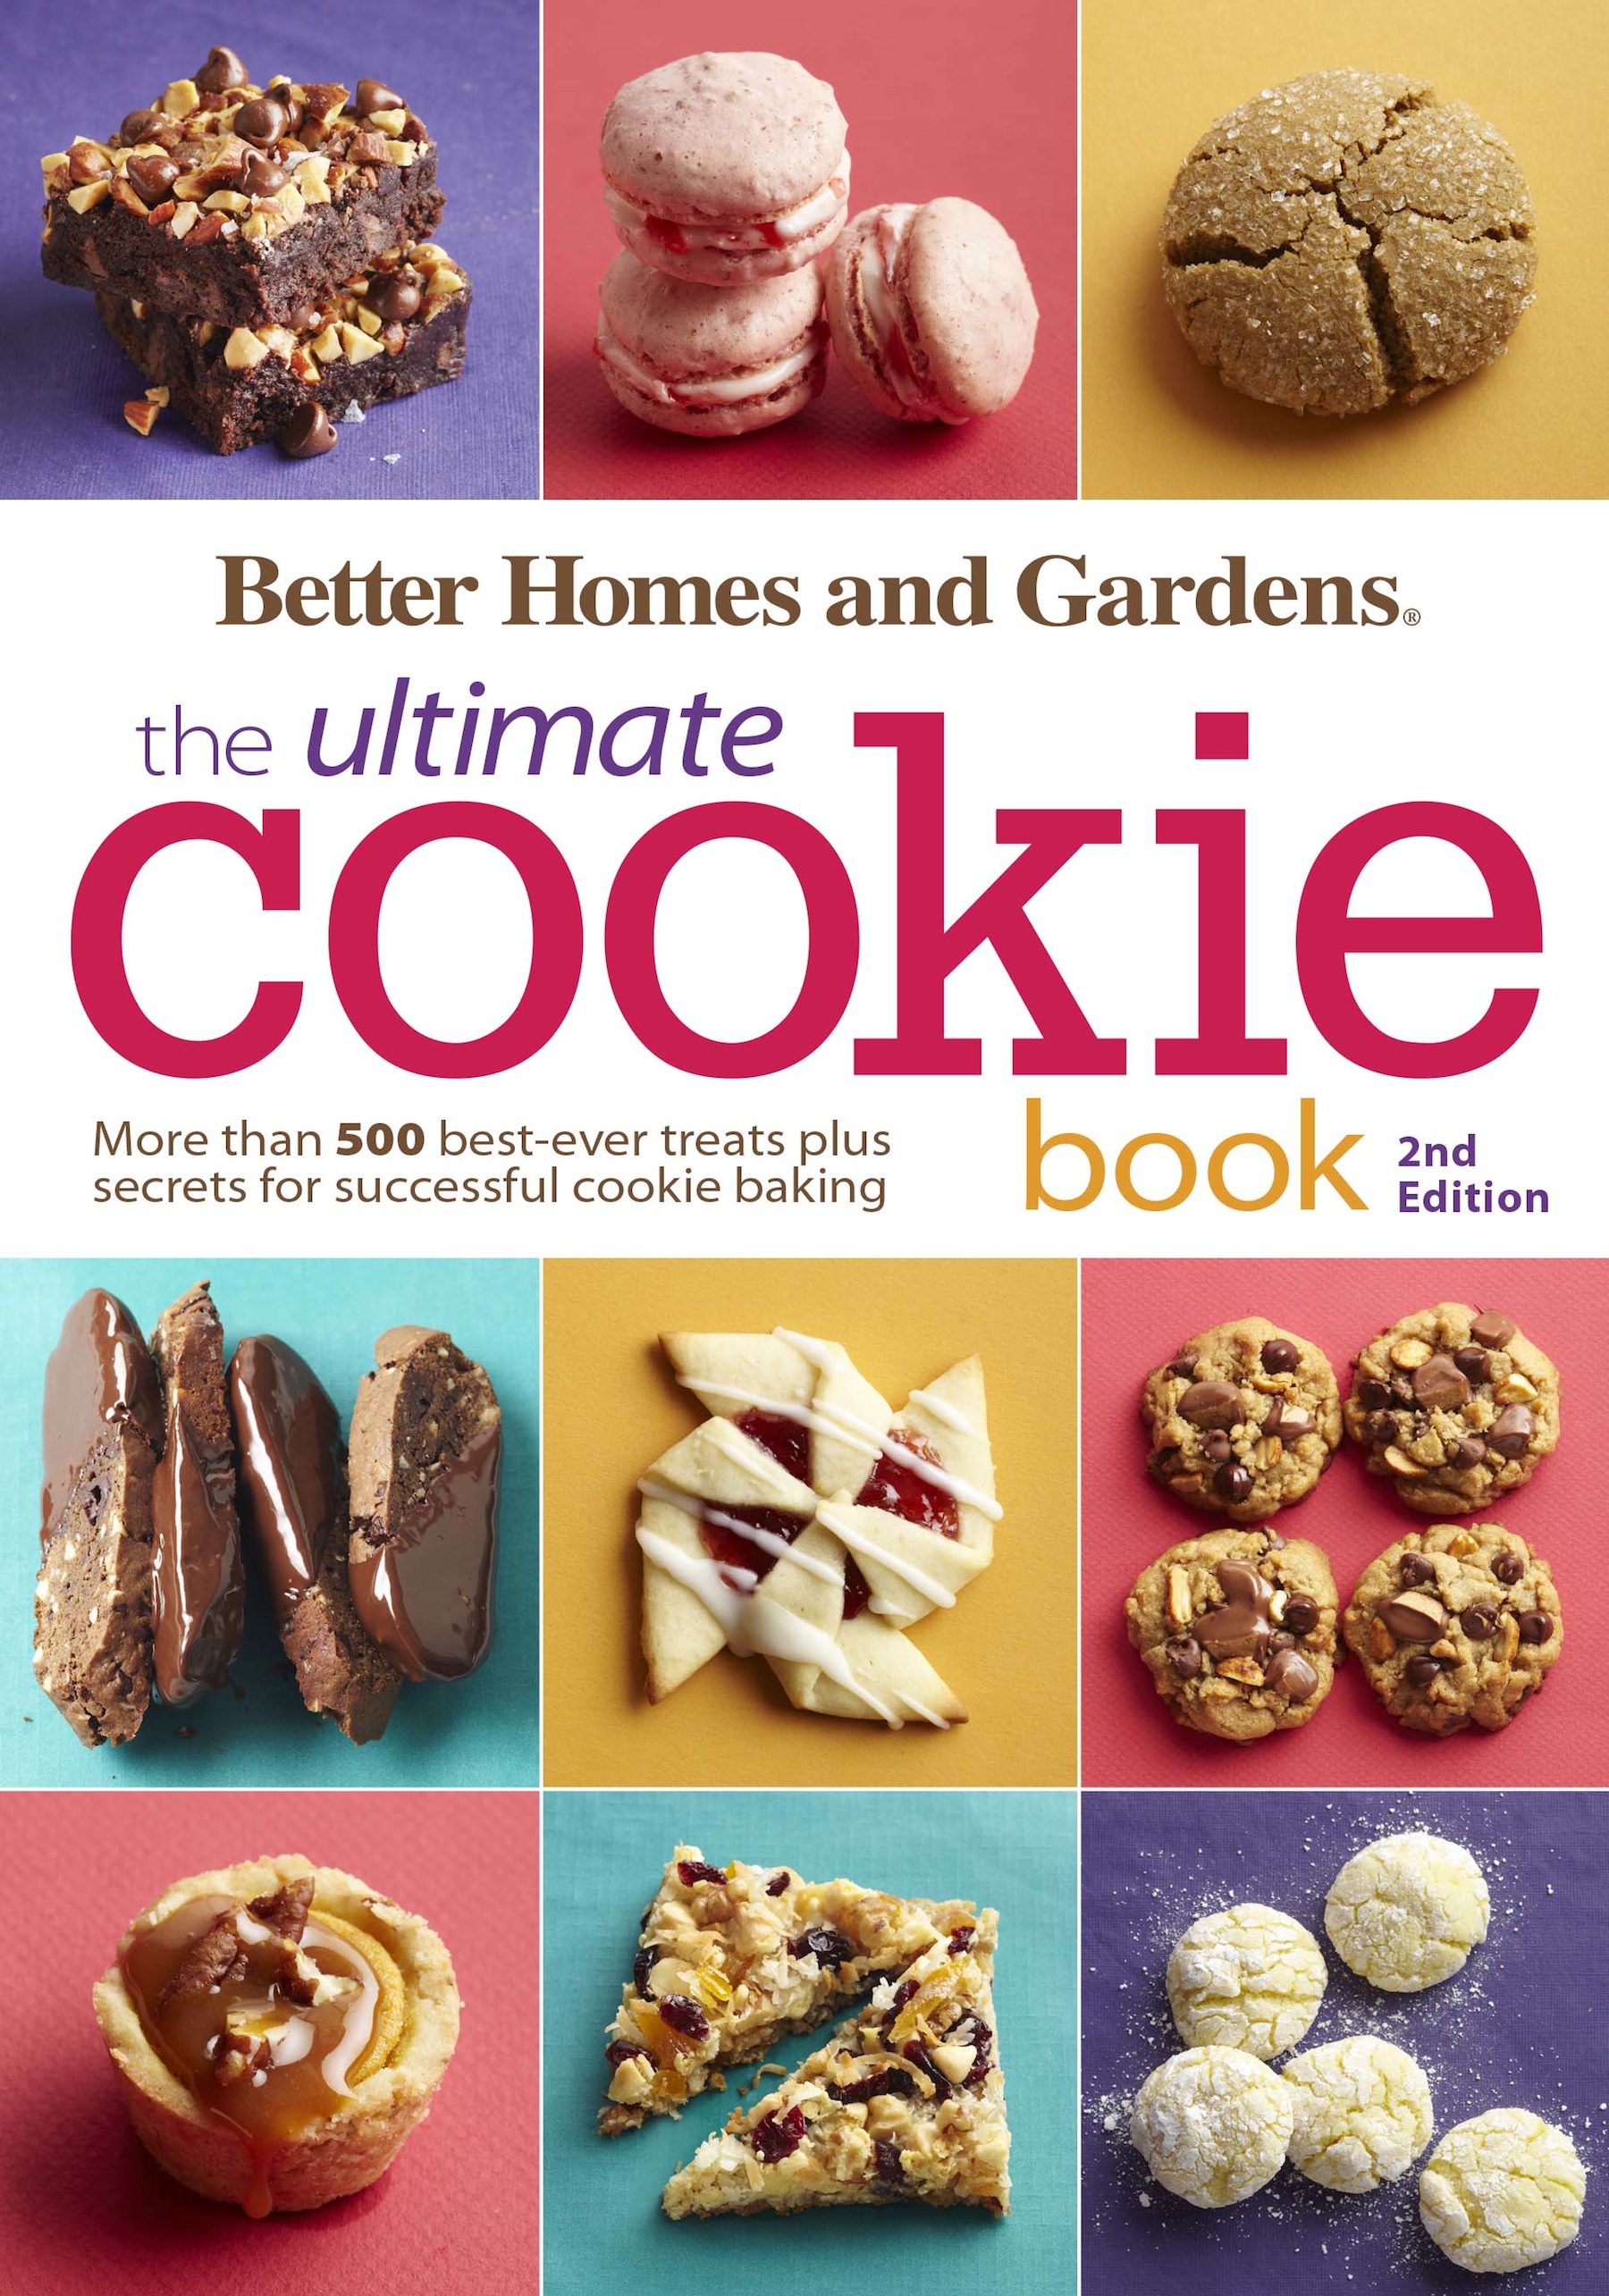 Imagen de portada para Better Homes and Gardens The Ultimate Cookie Book, Second Edition [electronic resource] : More than 500 Best-Ever Treats Plus Secrets for Successful Cookie Baking